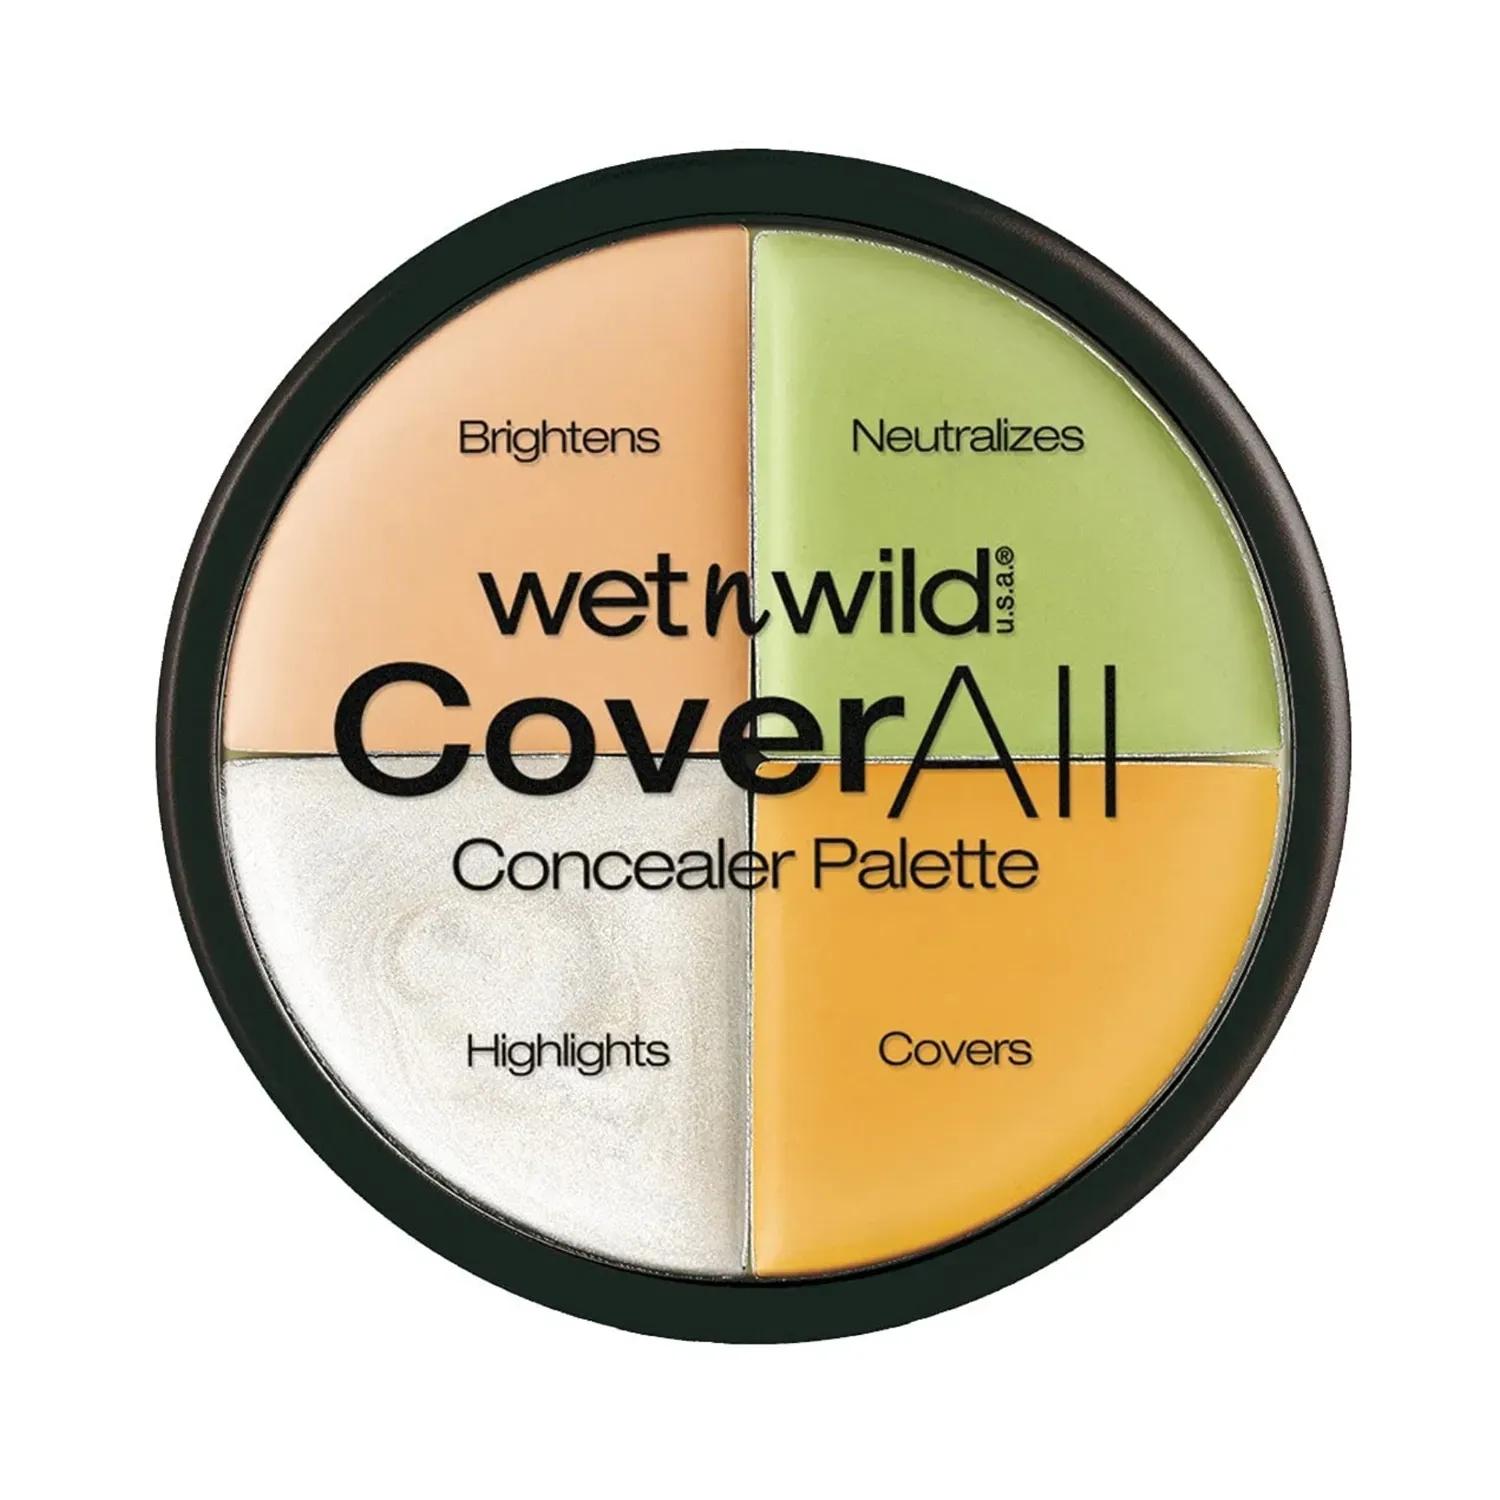 wet n wild coverall concealer palette - color commentary (6.5g)